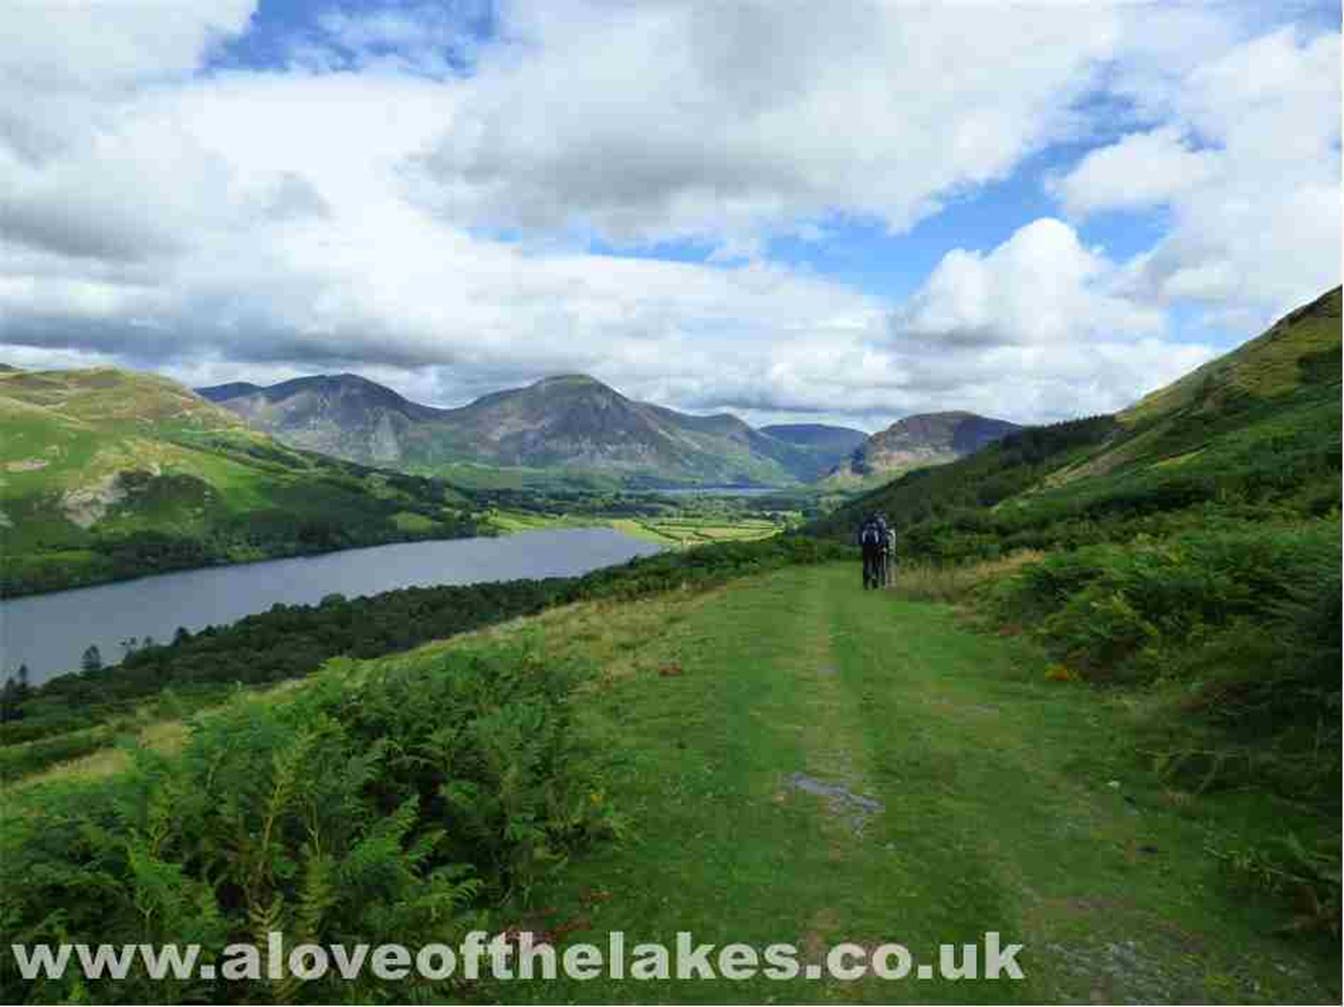 Just a short way down the circular path that provides some stunning views towards Buttermere